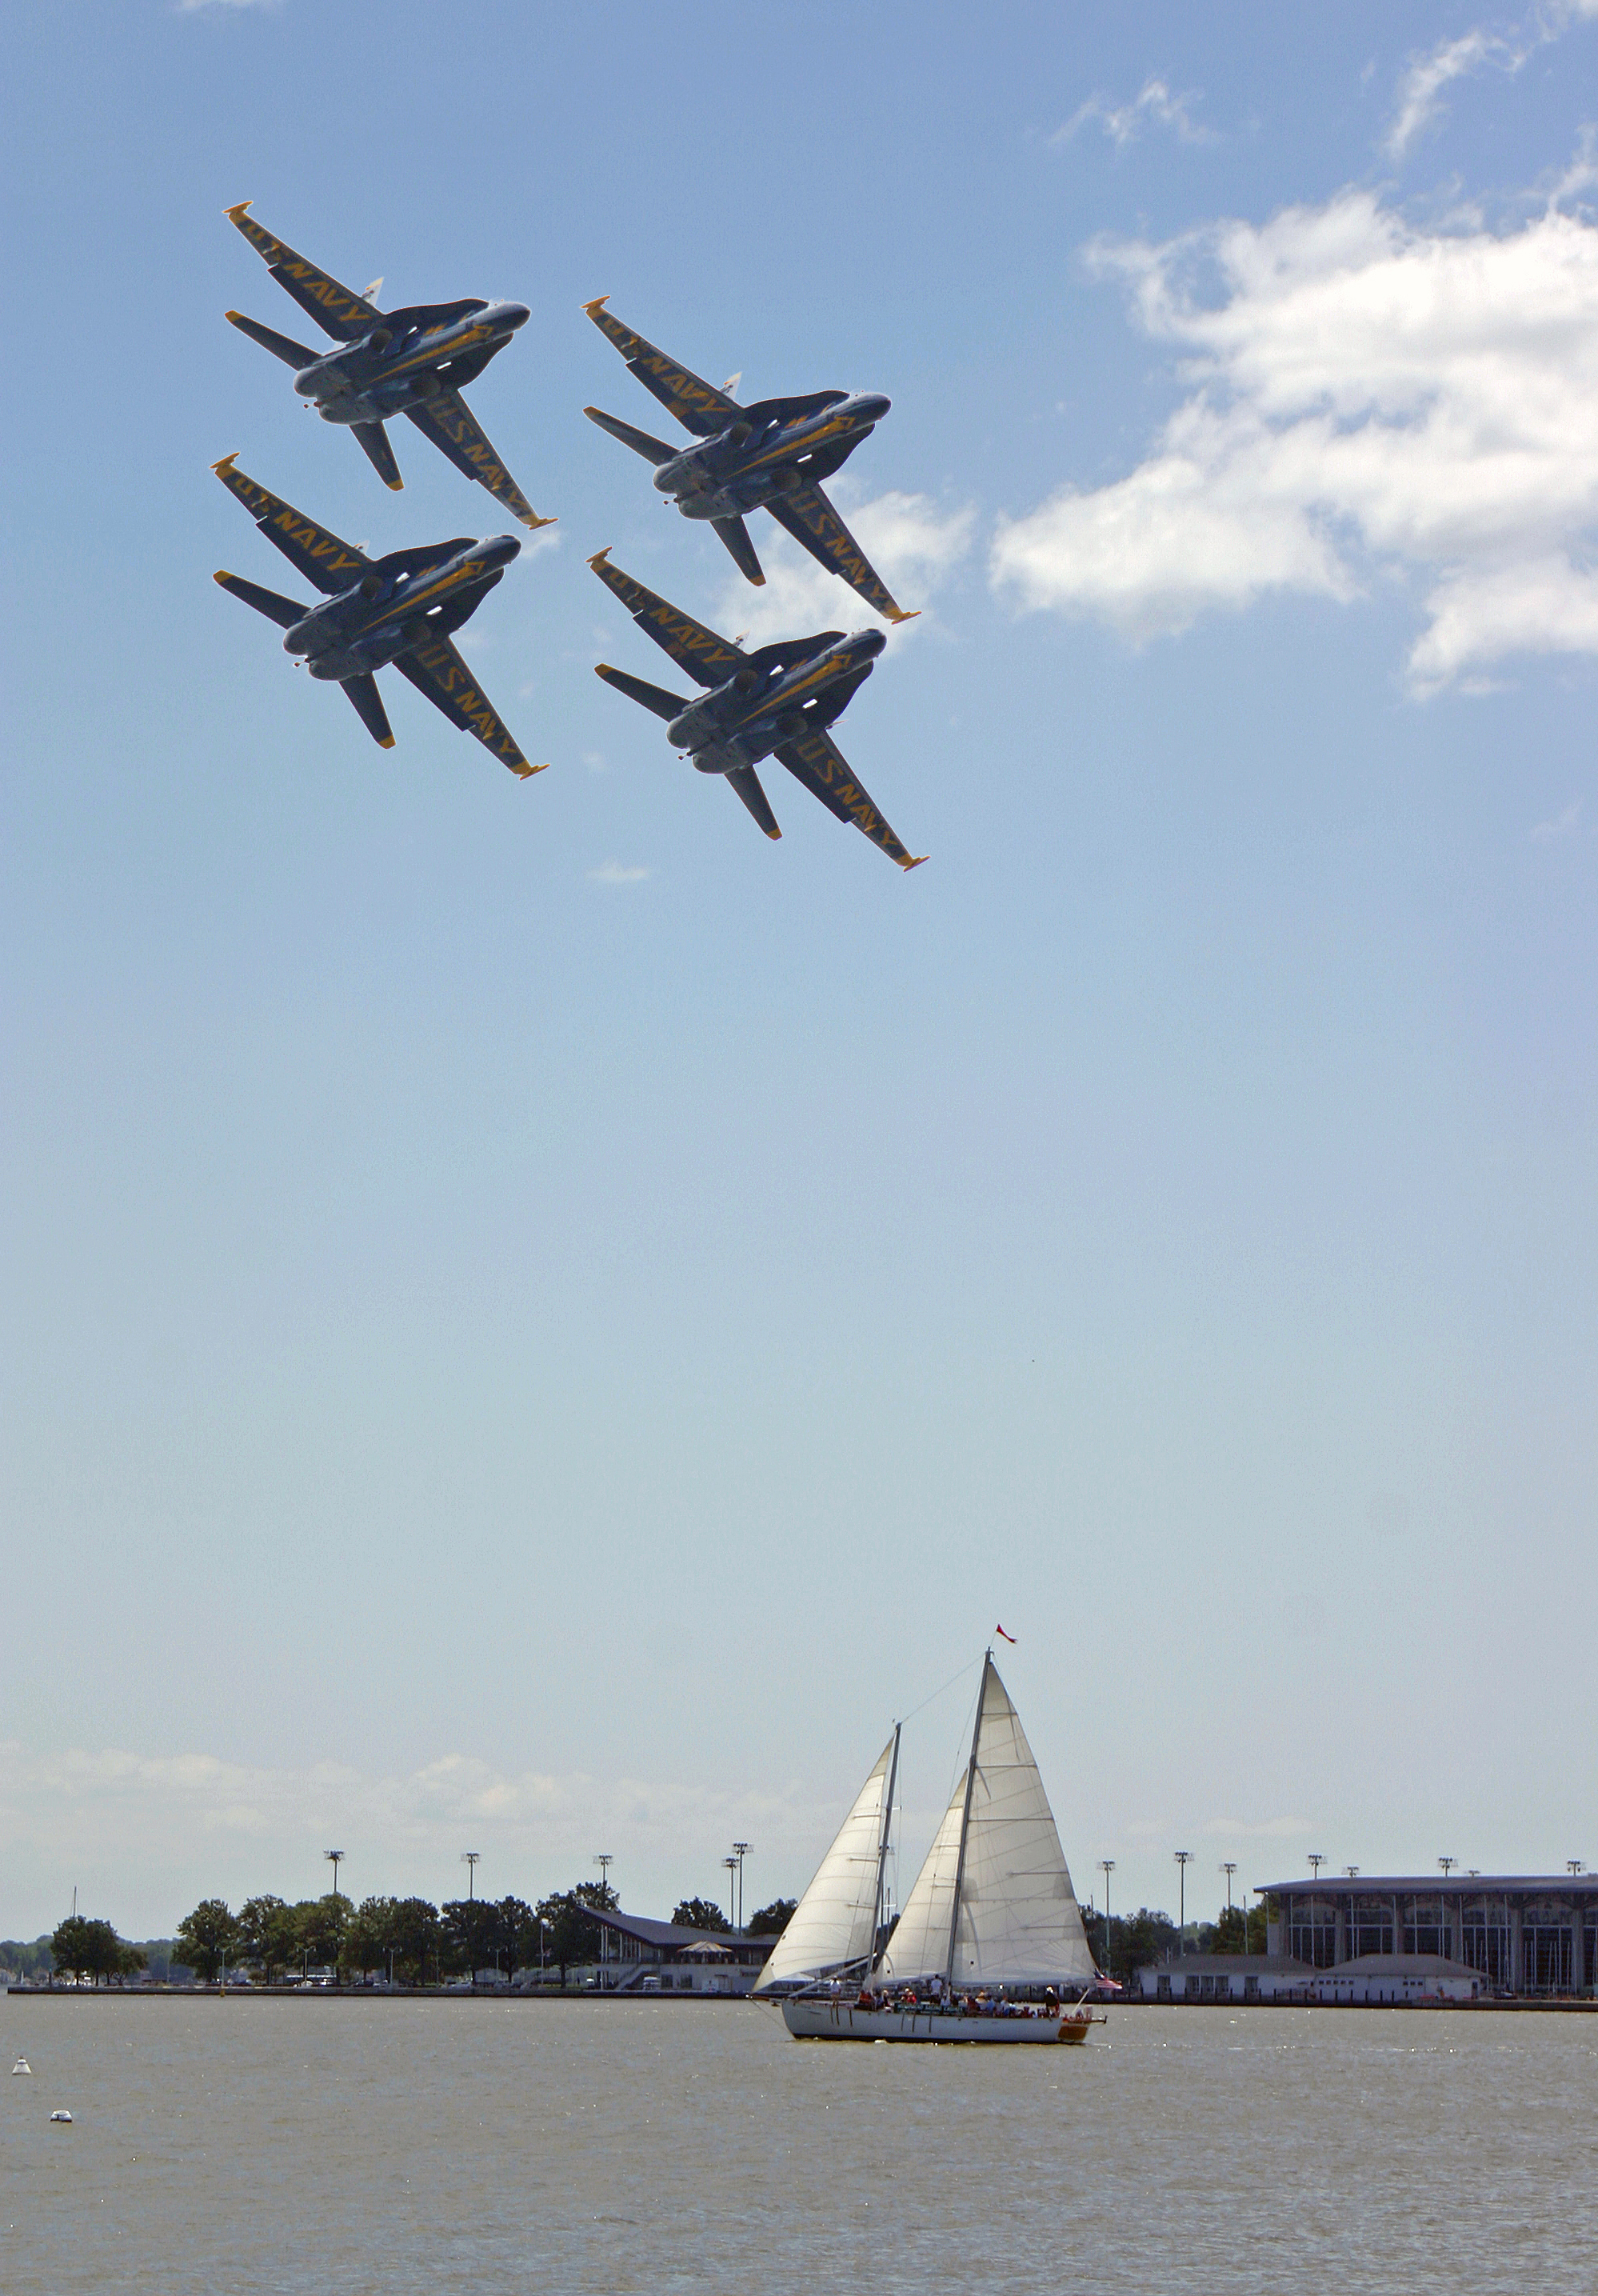 Four Blue Angel jets soaring over the schooner and water